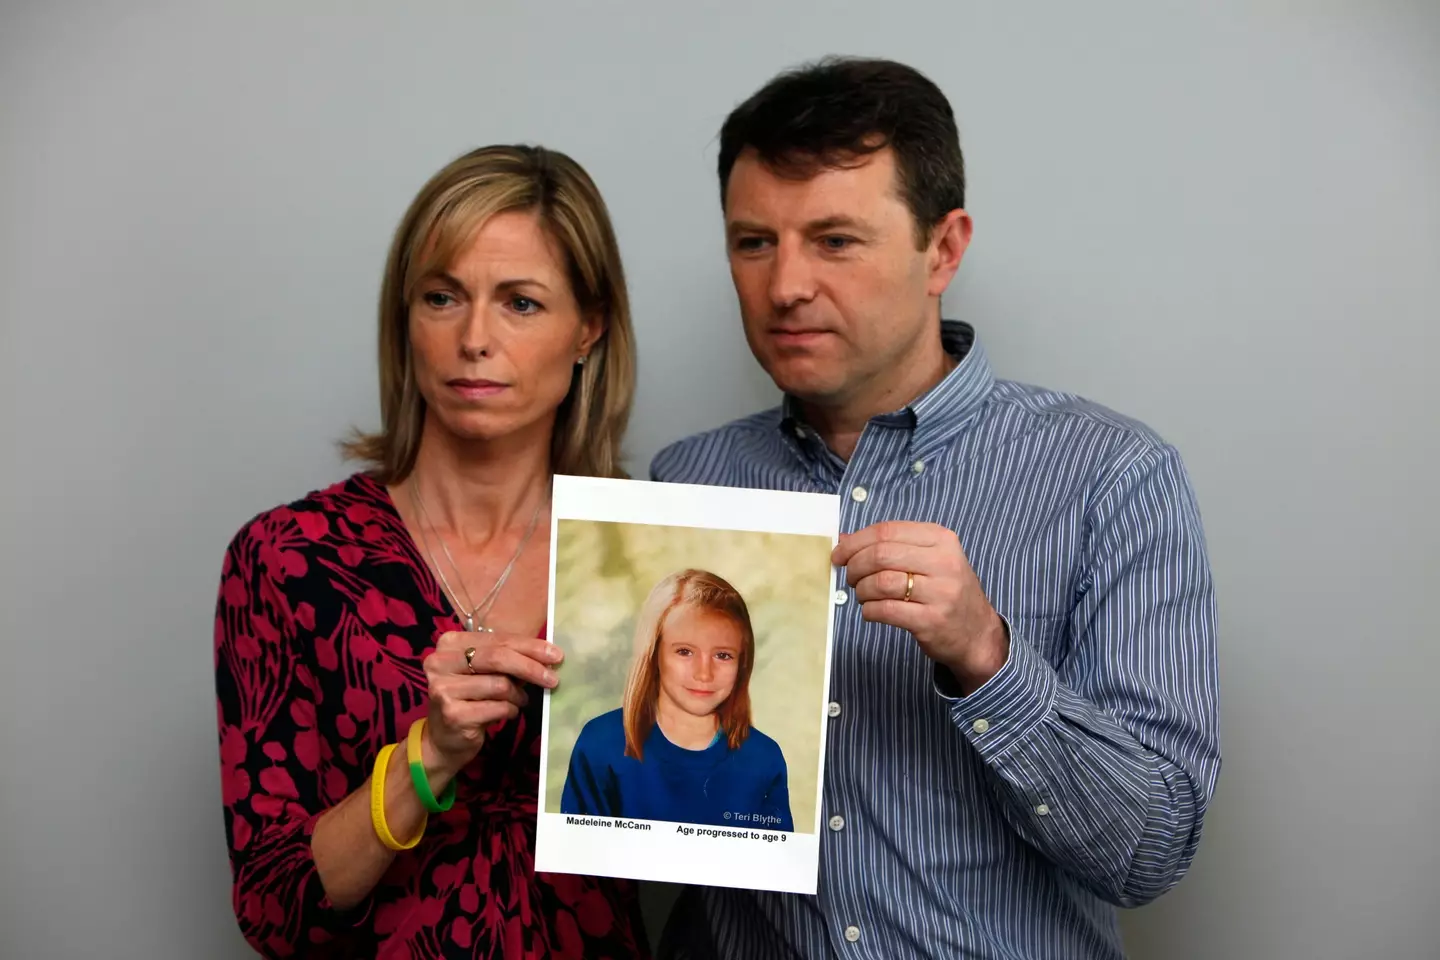 Christian Brueckner has been officially named as a suspect in Madeleine McCann's disappearance.